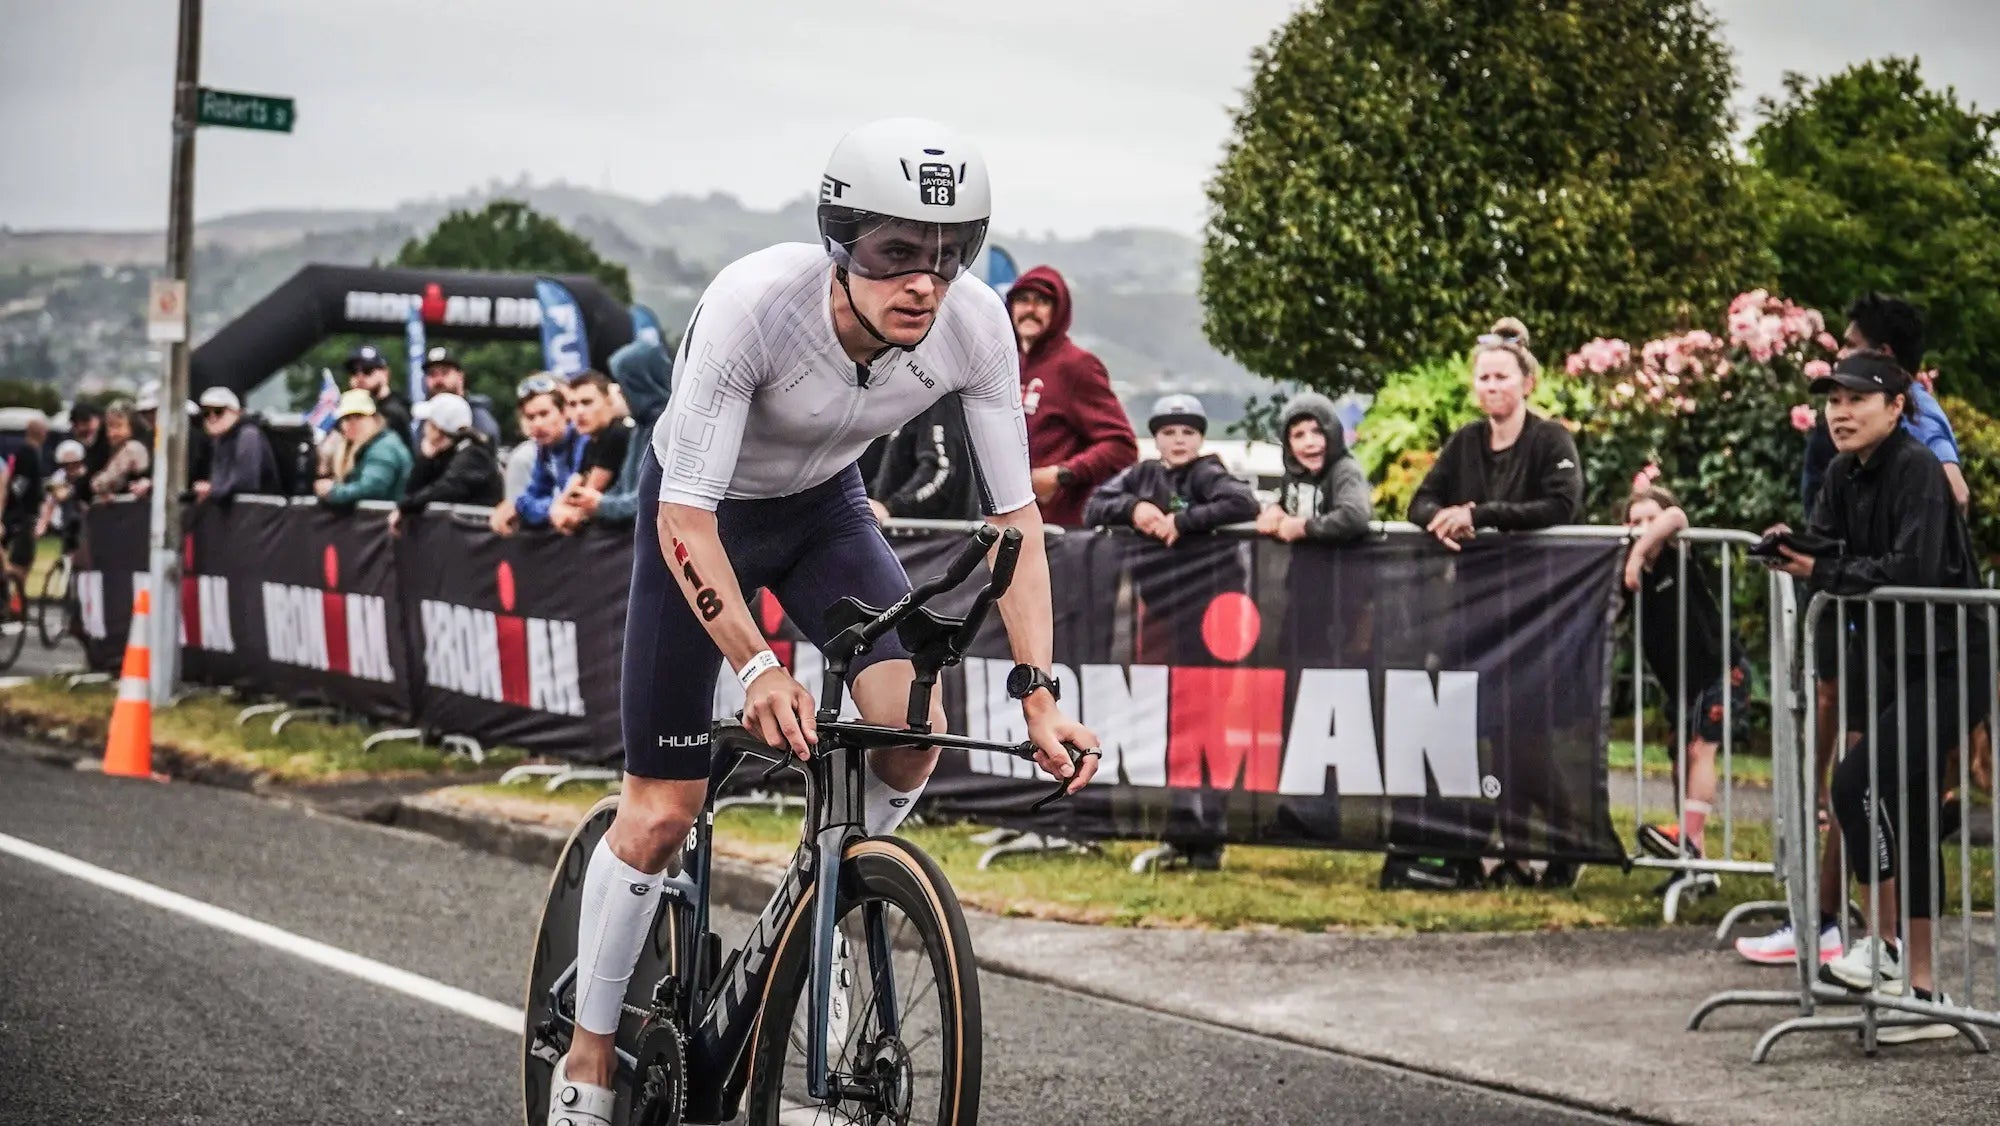 Jayden Professional Triathlete Cycling at Ironman 70.3 Taupo